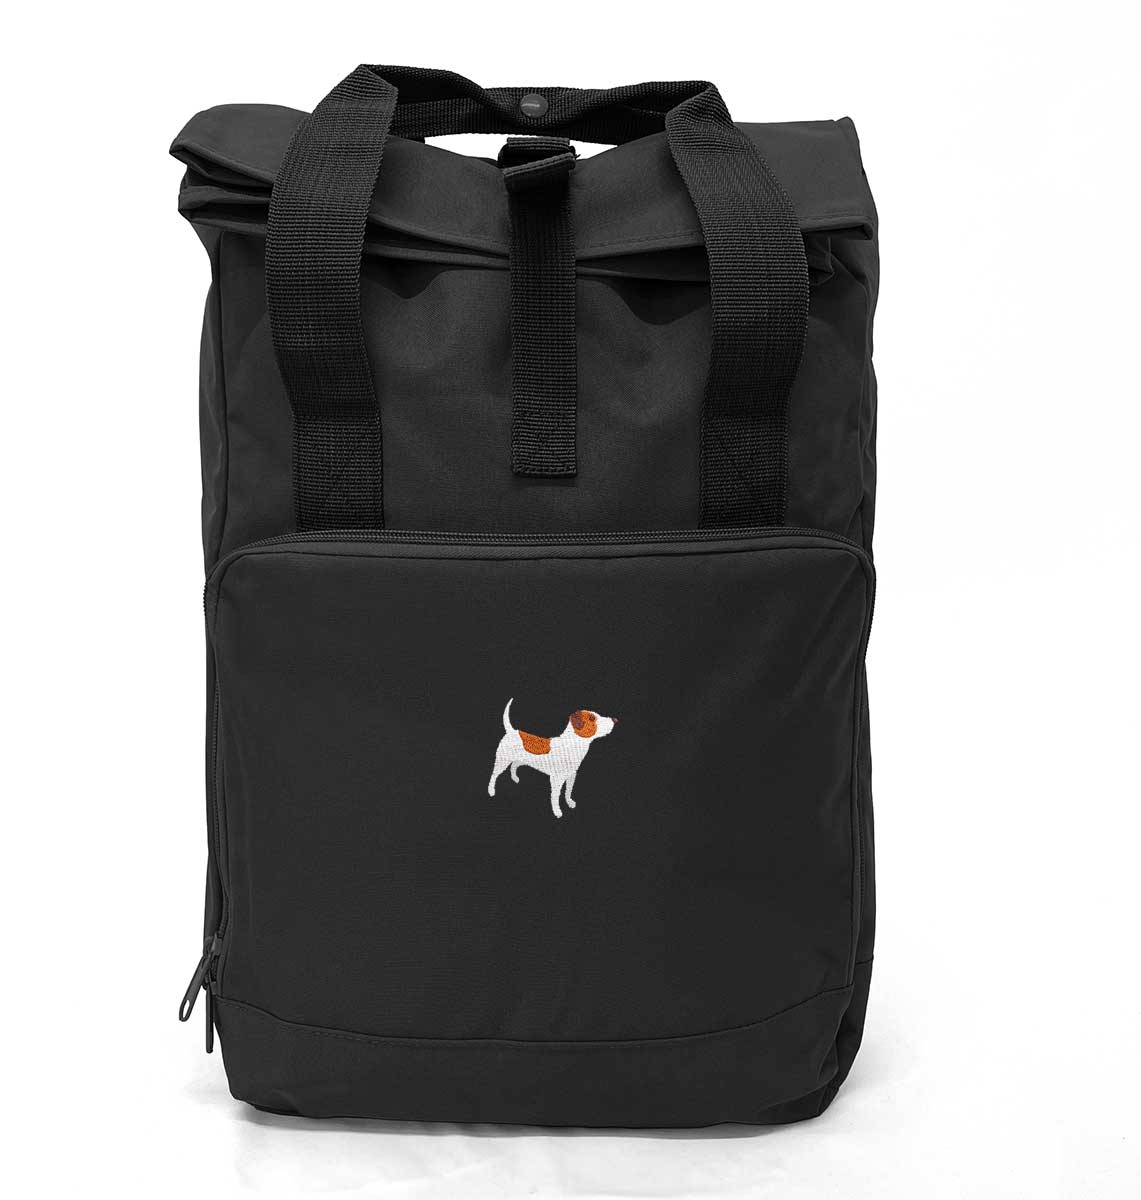 Jack Russell Roll-top Laptop Recycled Backpack - Blue Panda